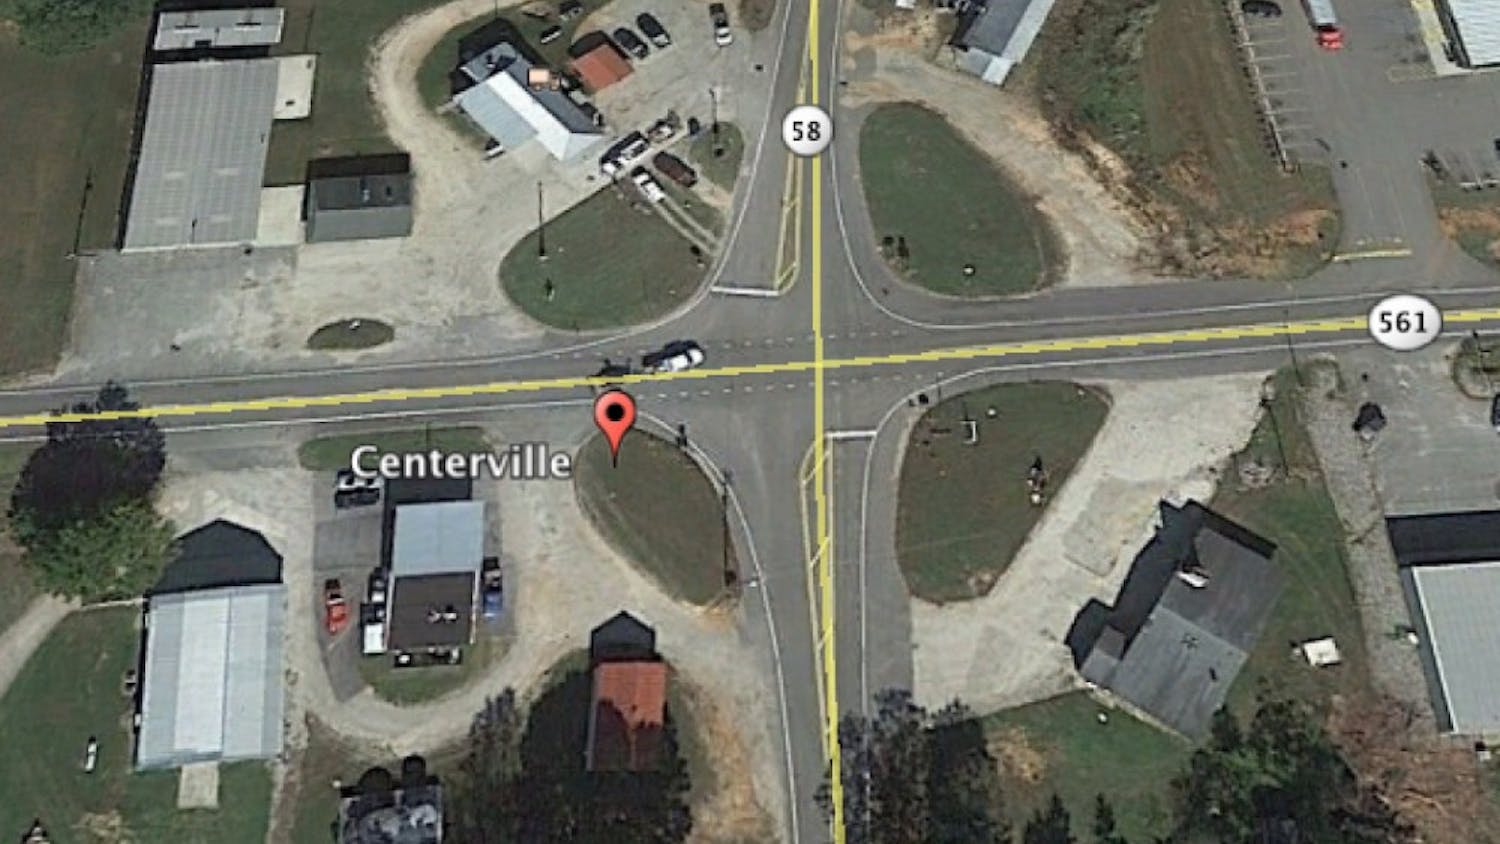 The town of Centerville is located about 70 miles from Chapel Hill. Google Earth screenshot by The Daily Tar Heel.